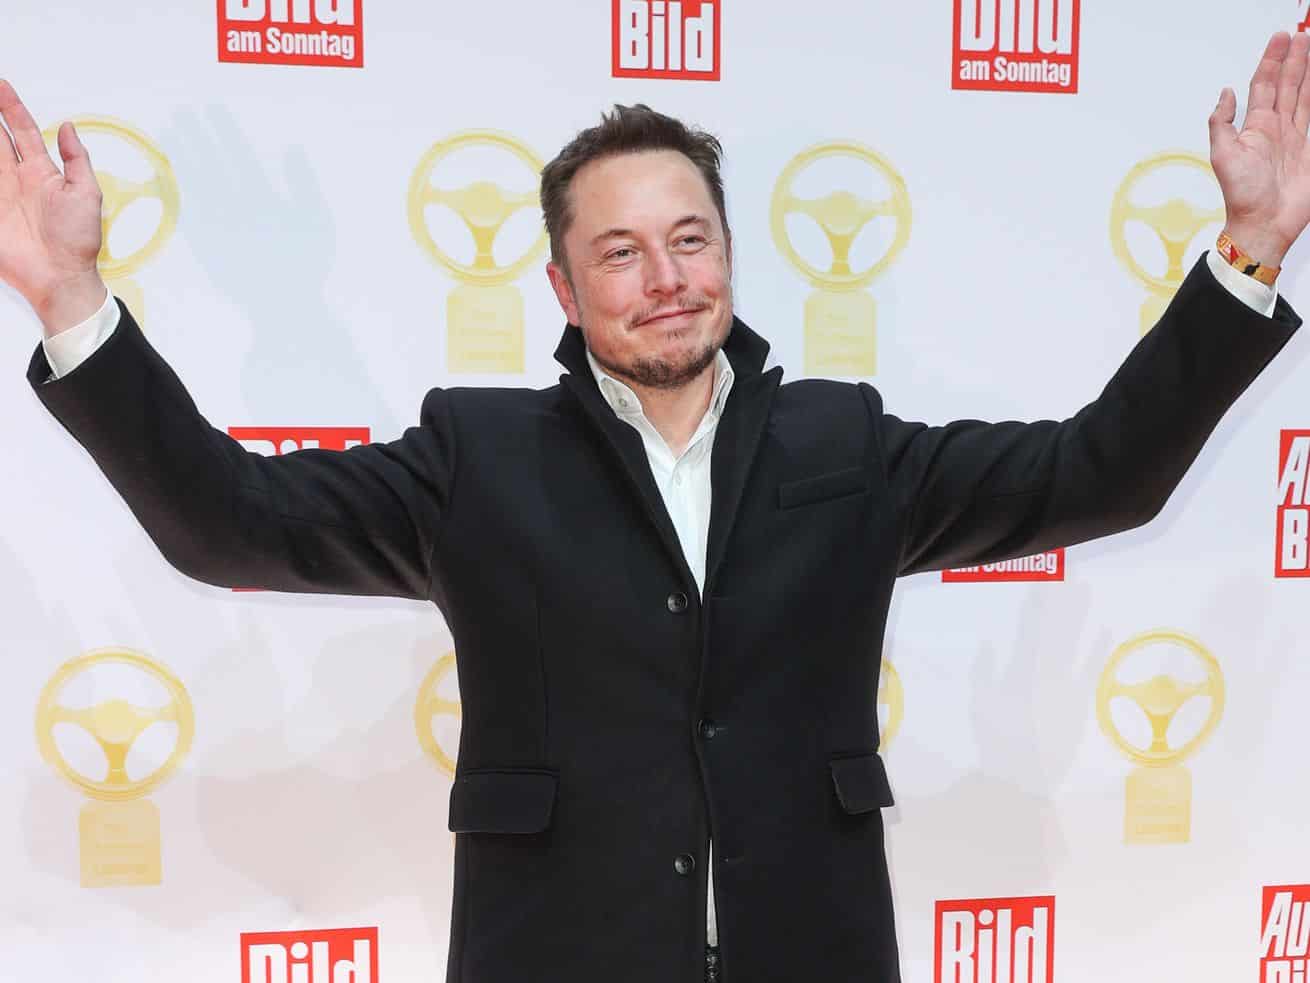 “These billionaires are not our friends”: The irony of Elon Musk leading the GameStop revolution